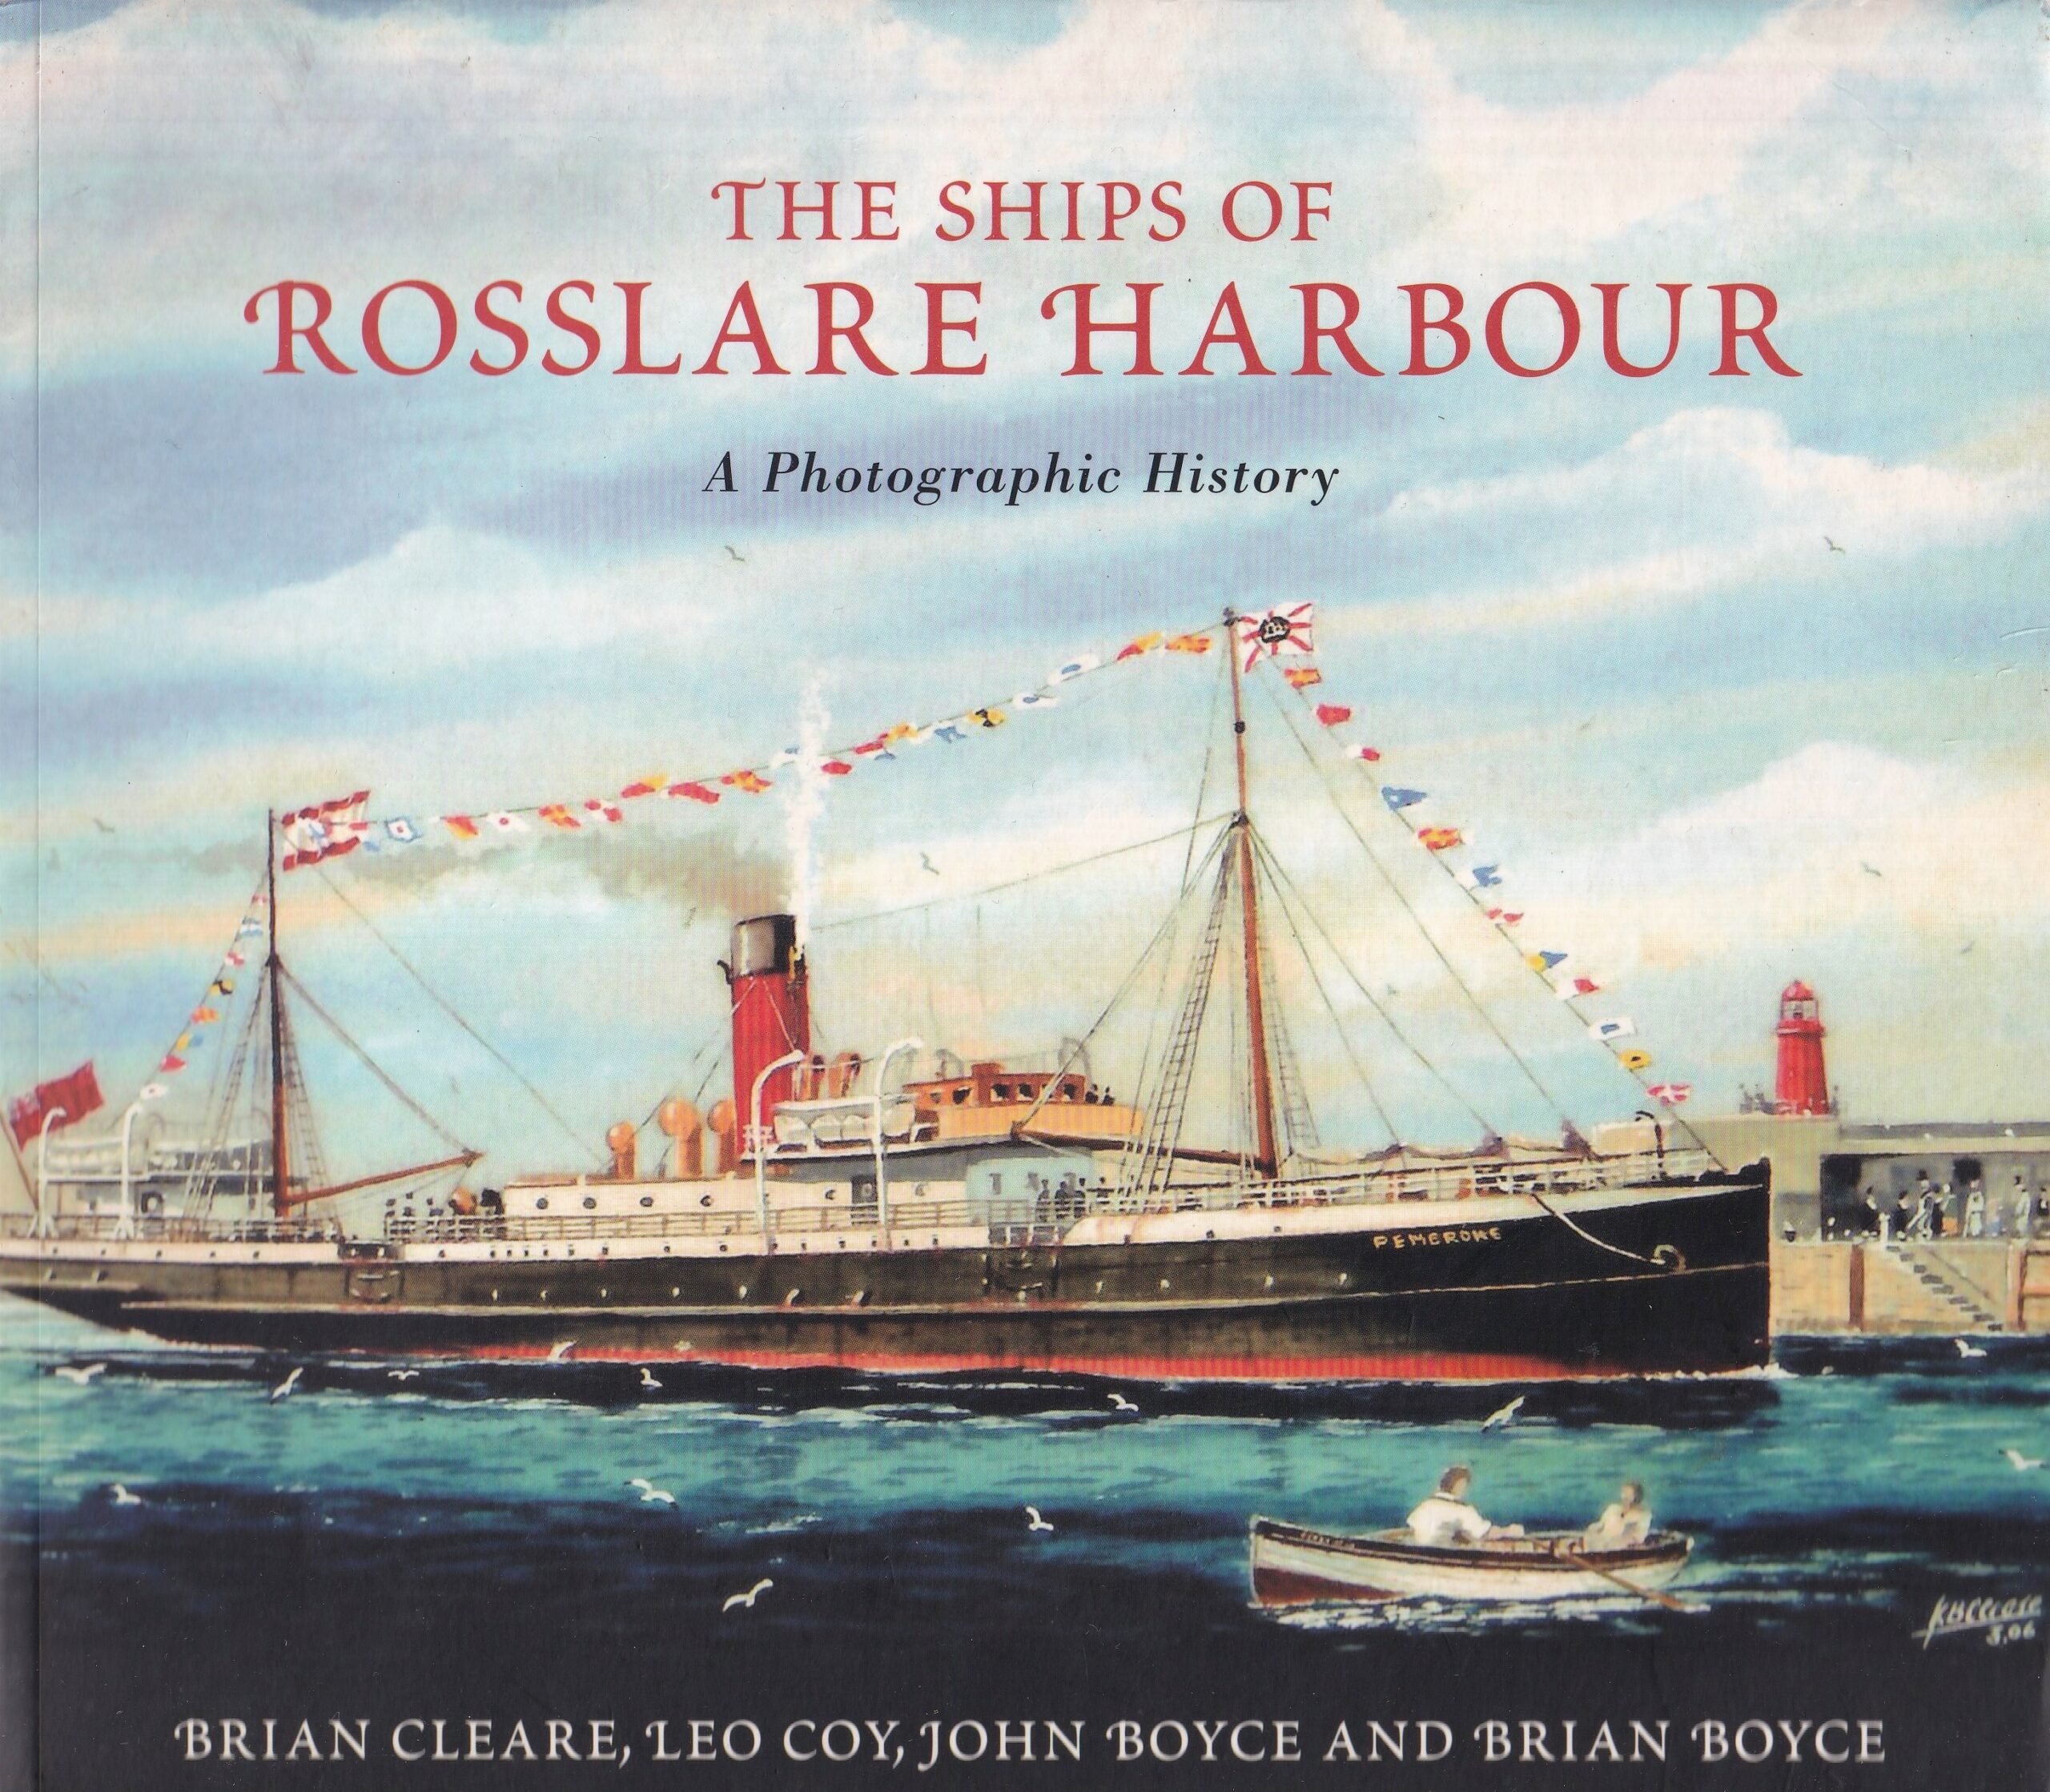 The Ships of Rosslare Harbour: A Photographic History by Brian Cleare, Leo Coy, John Boyce and Brian Boyce